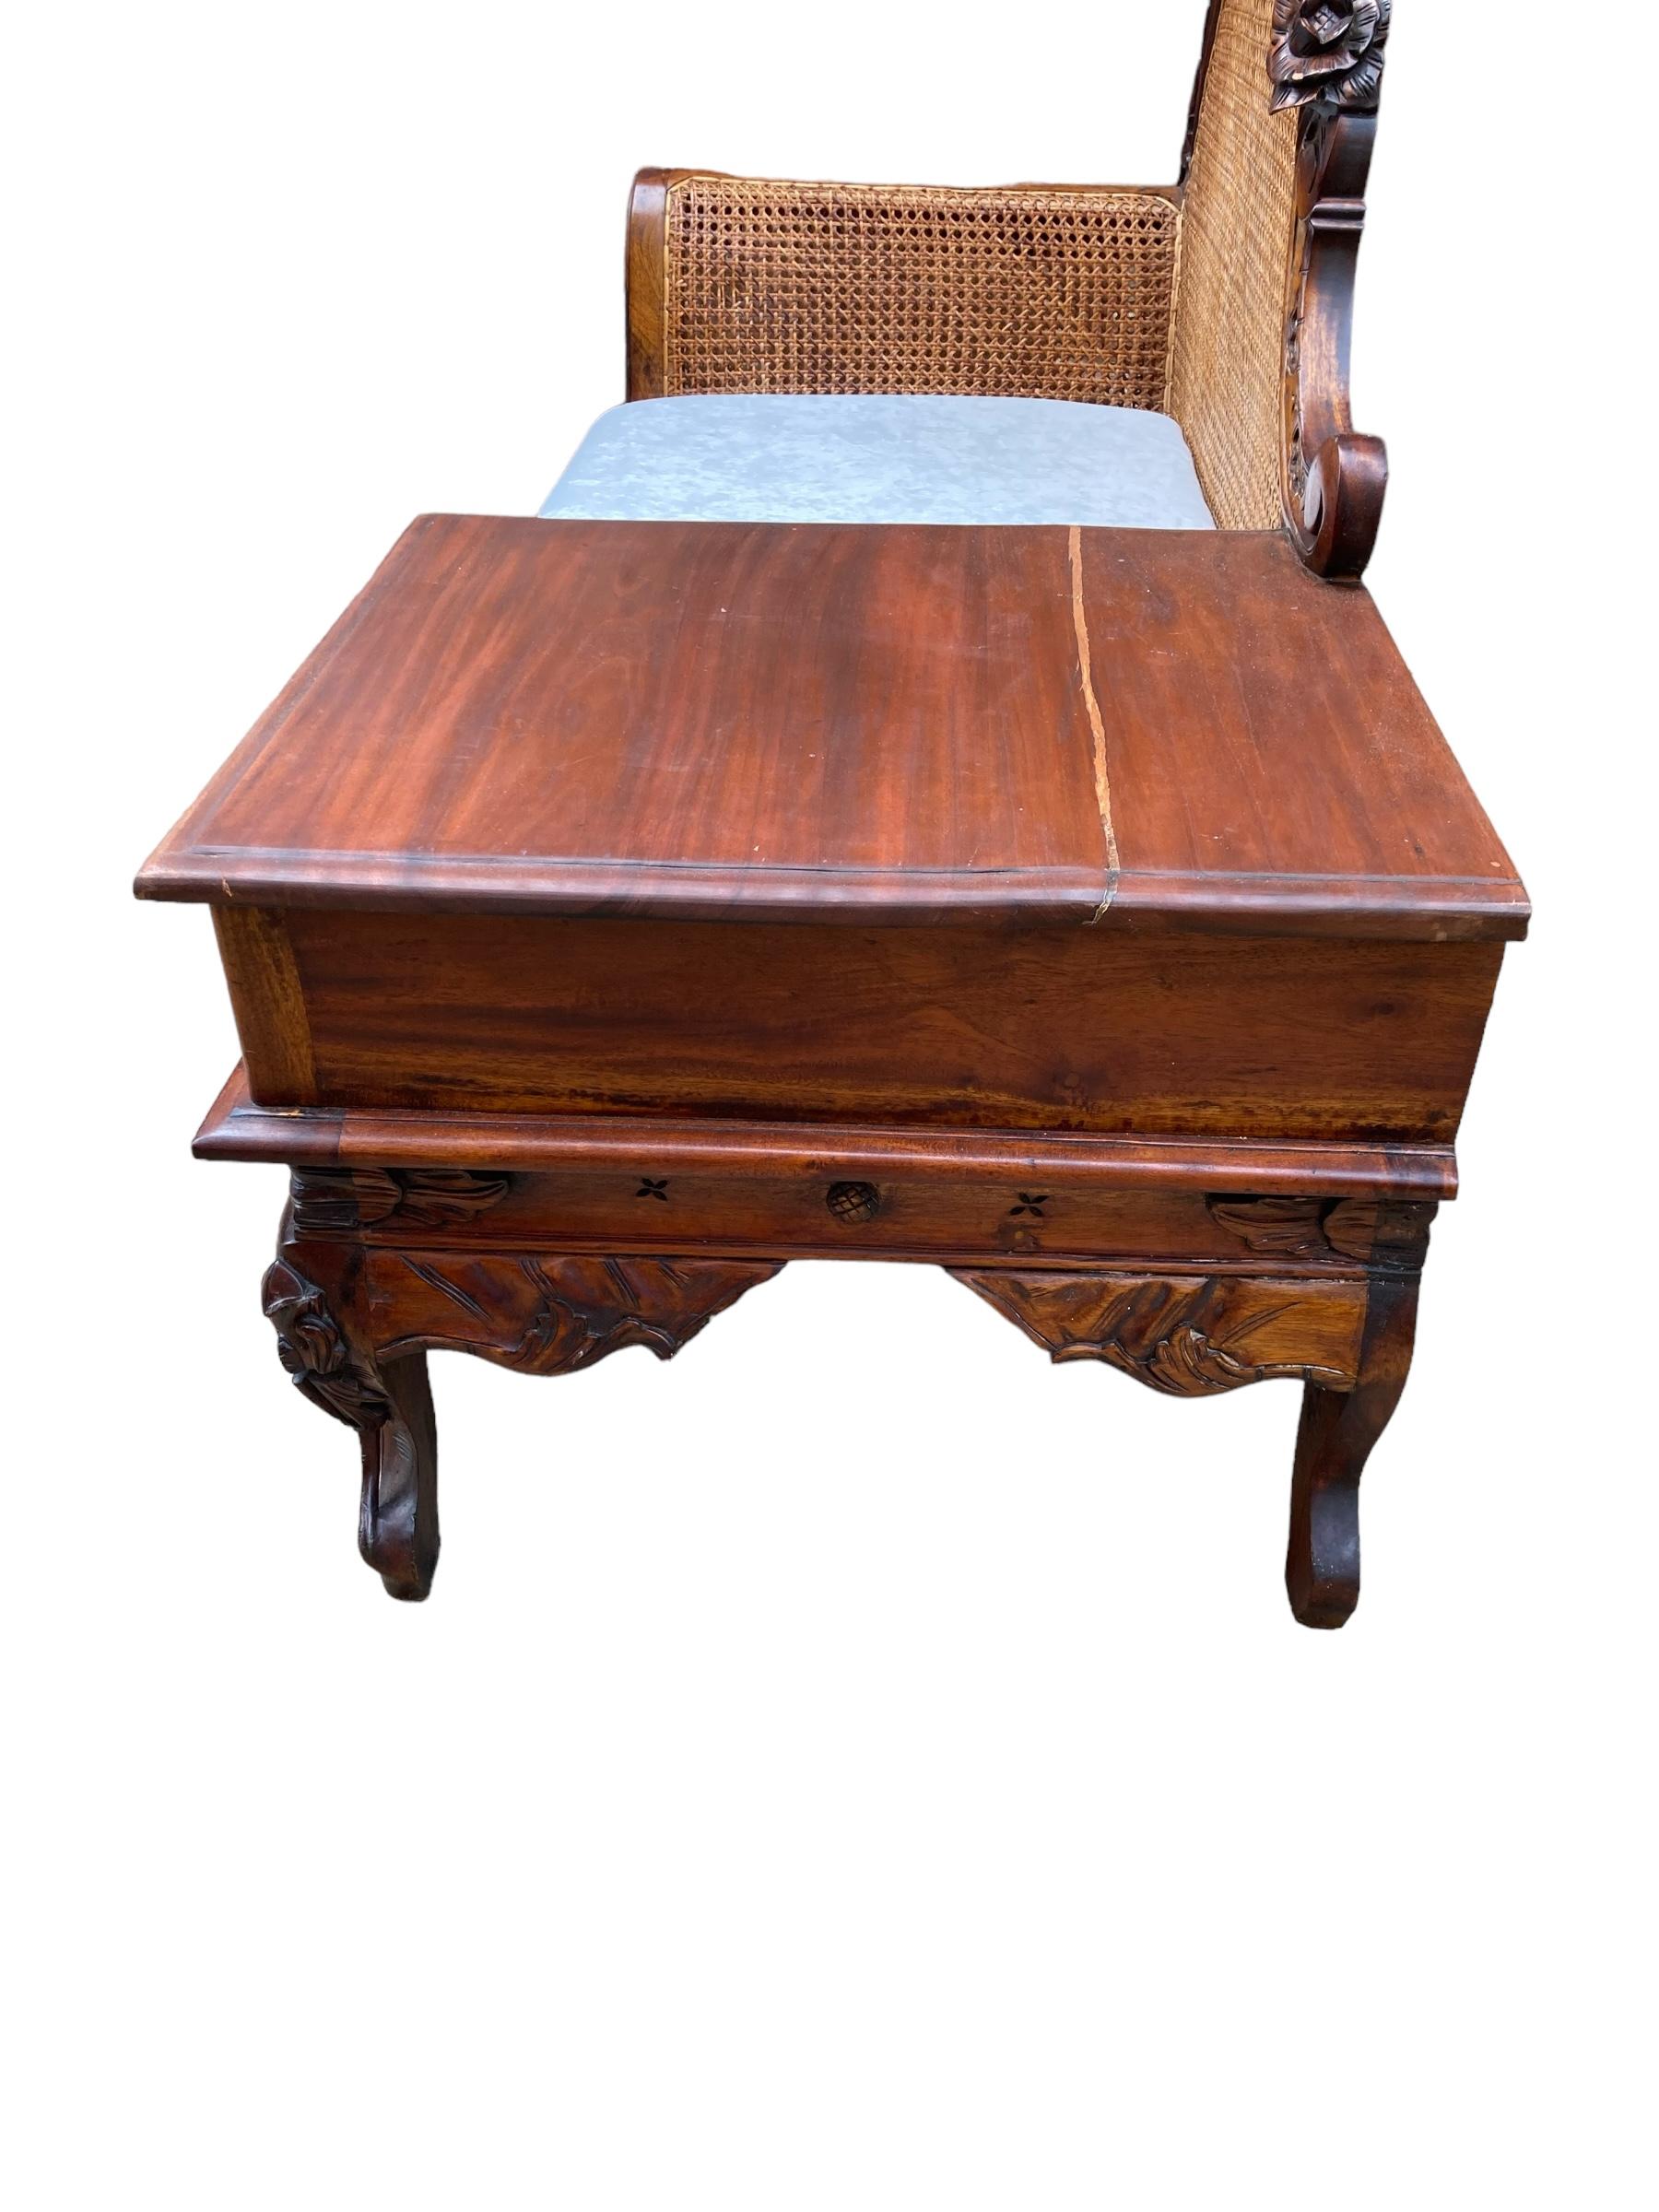 Original Hand Carved Mahogany Victorian Telephone or Gossip Bench, Bergere  For Sale 3